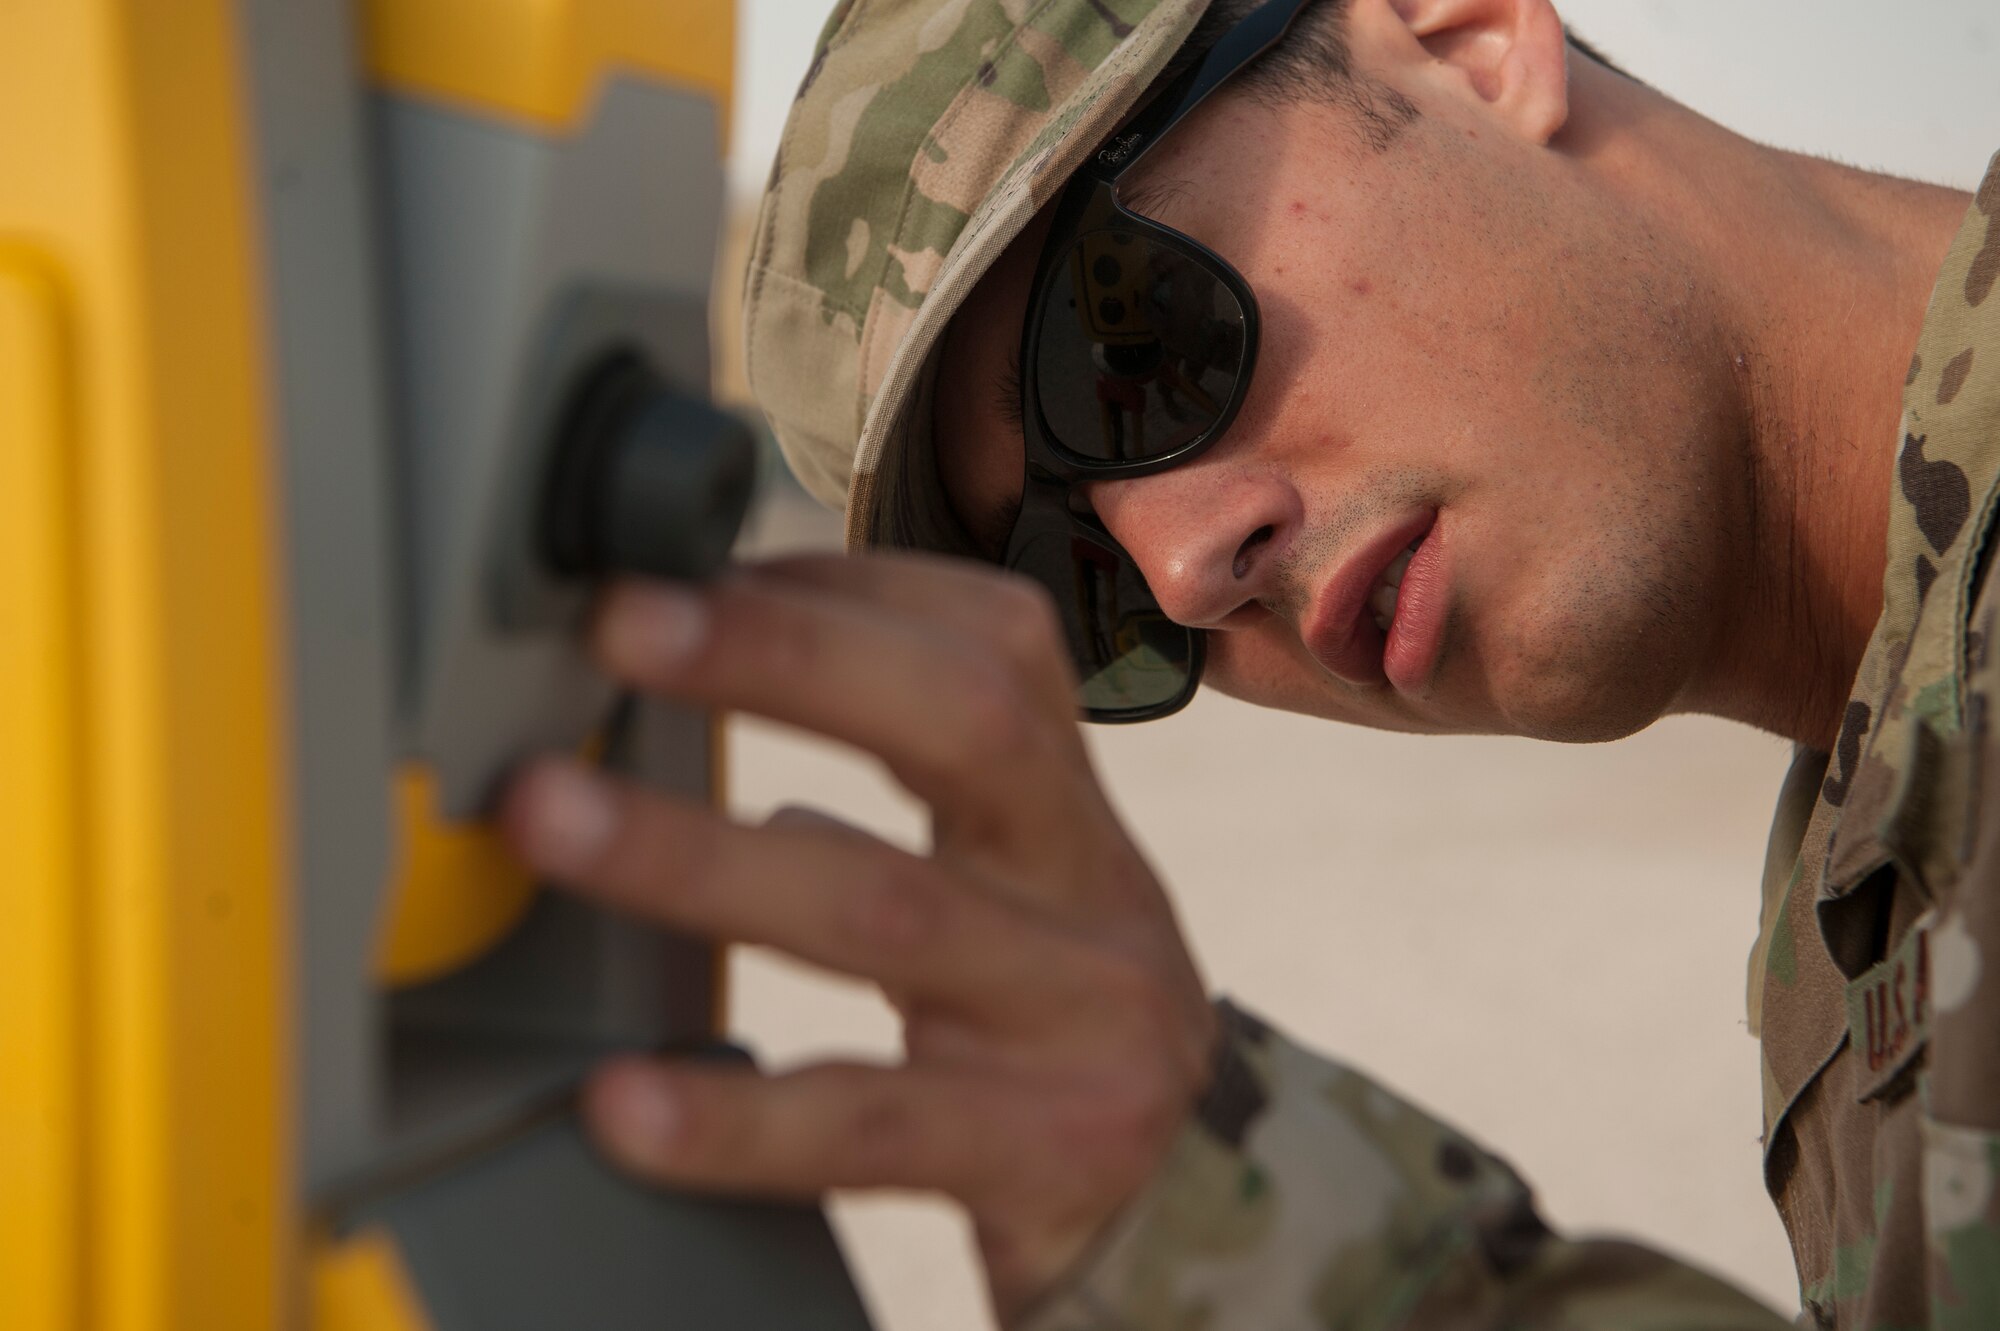 Staff Sgt. Arich Bosshart, 379th Expeditionary Civil Engineer Squadron geobase NCO in charge, tests surveying equipment Dec. 11, 2018, at Al Udeid Air Base, Qatar. Bosshart is responsible for creating and updating installation maps with the use of geospatial information system equipment and automated computer-aided design and drafting software. He also provides surveying support to construction that occurs on Al Udeid. (U.S. Air Force photo by Tech. Sgt. Christopher Hubenthal)